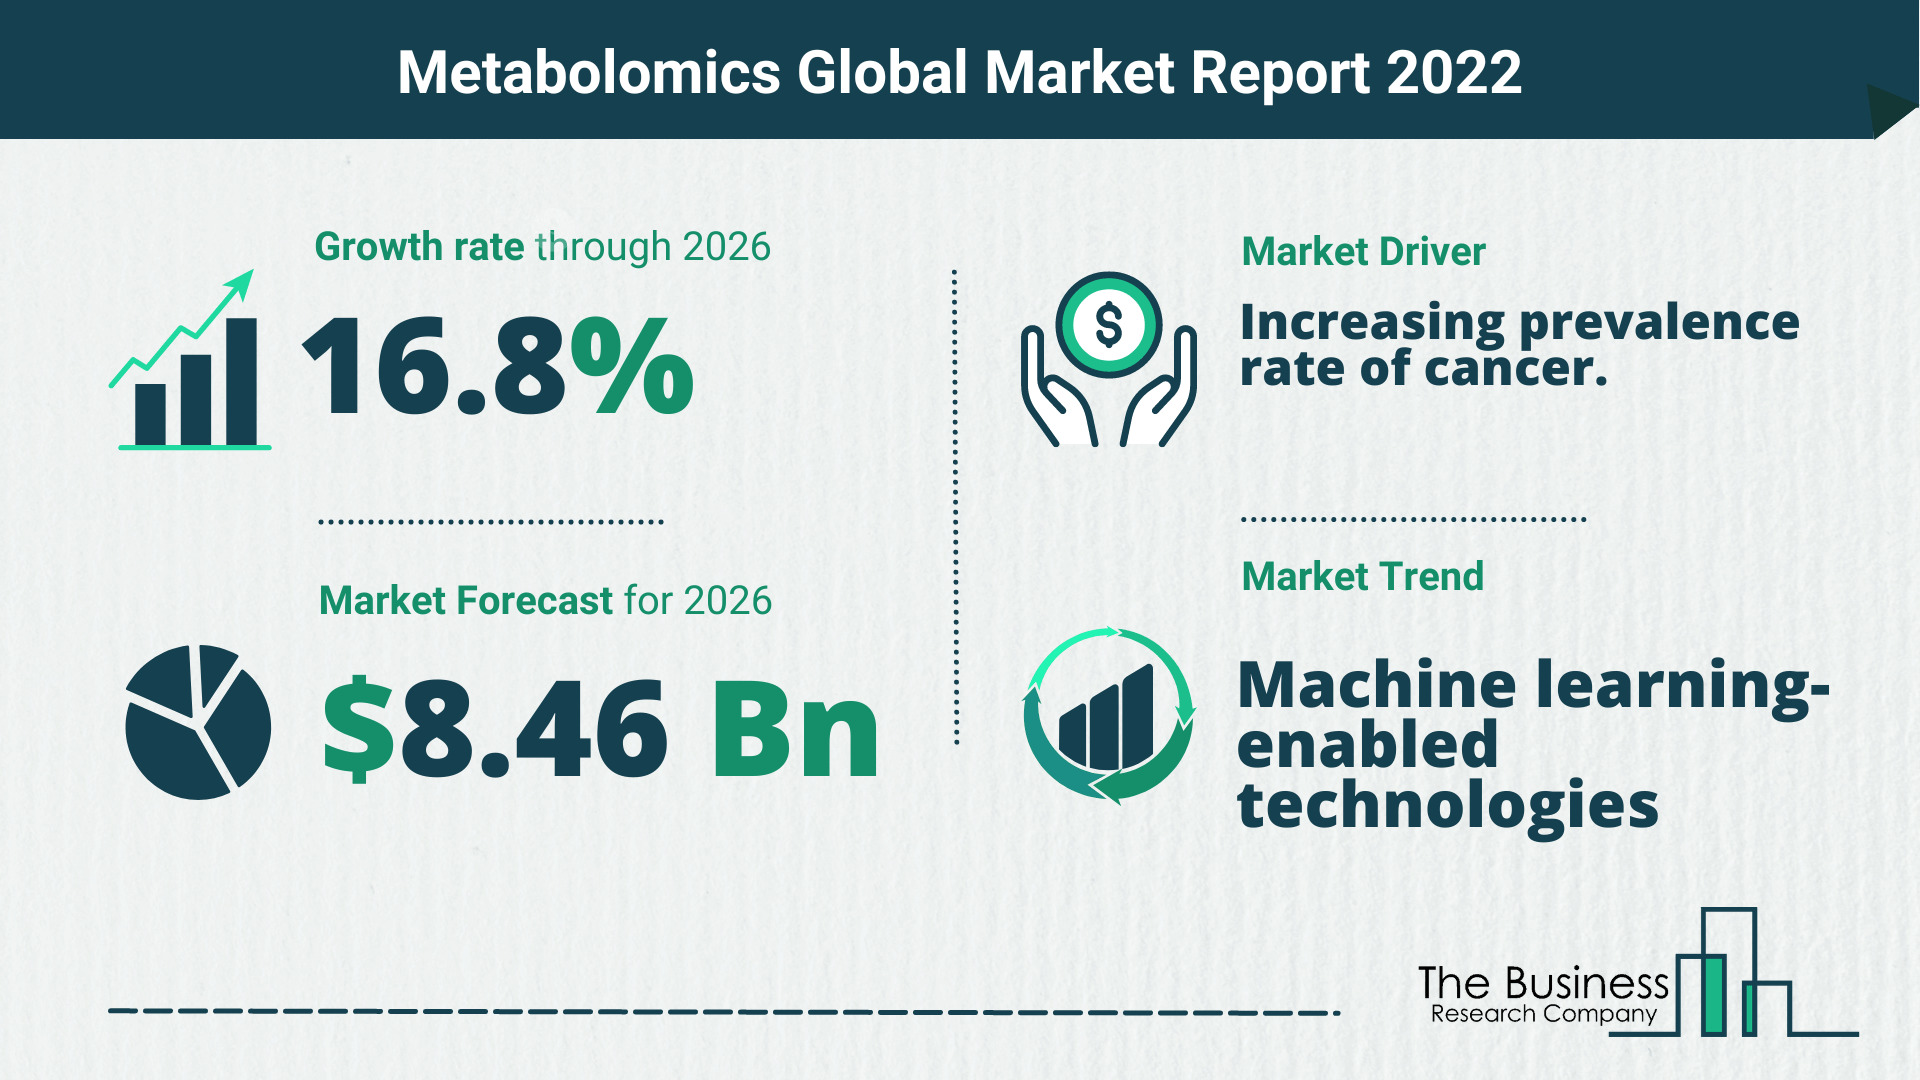 What Is The Metabolomics Market Overview In 2022?